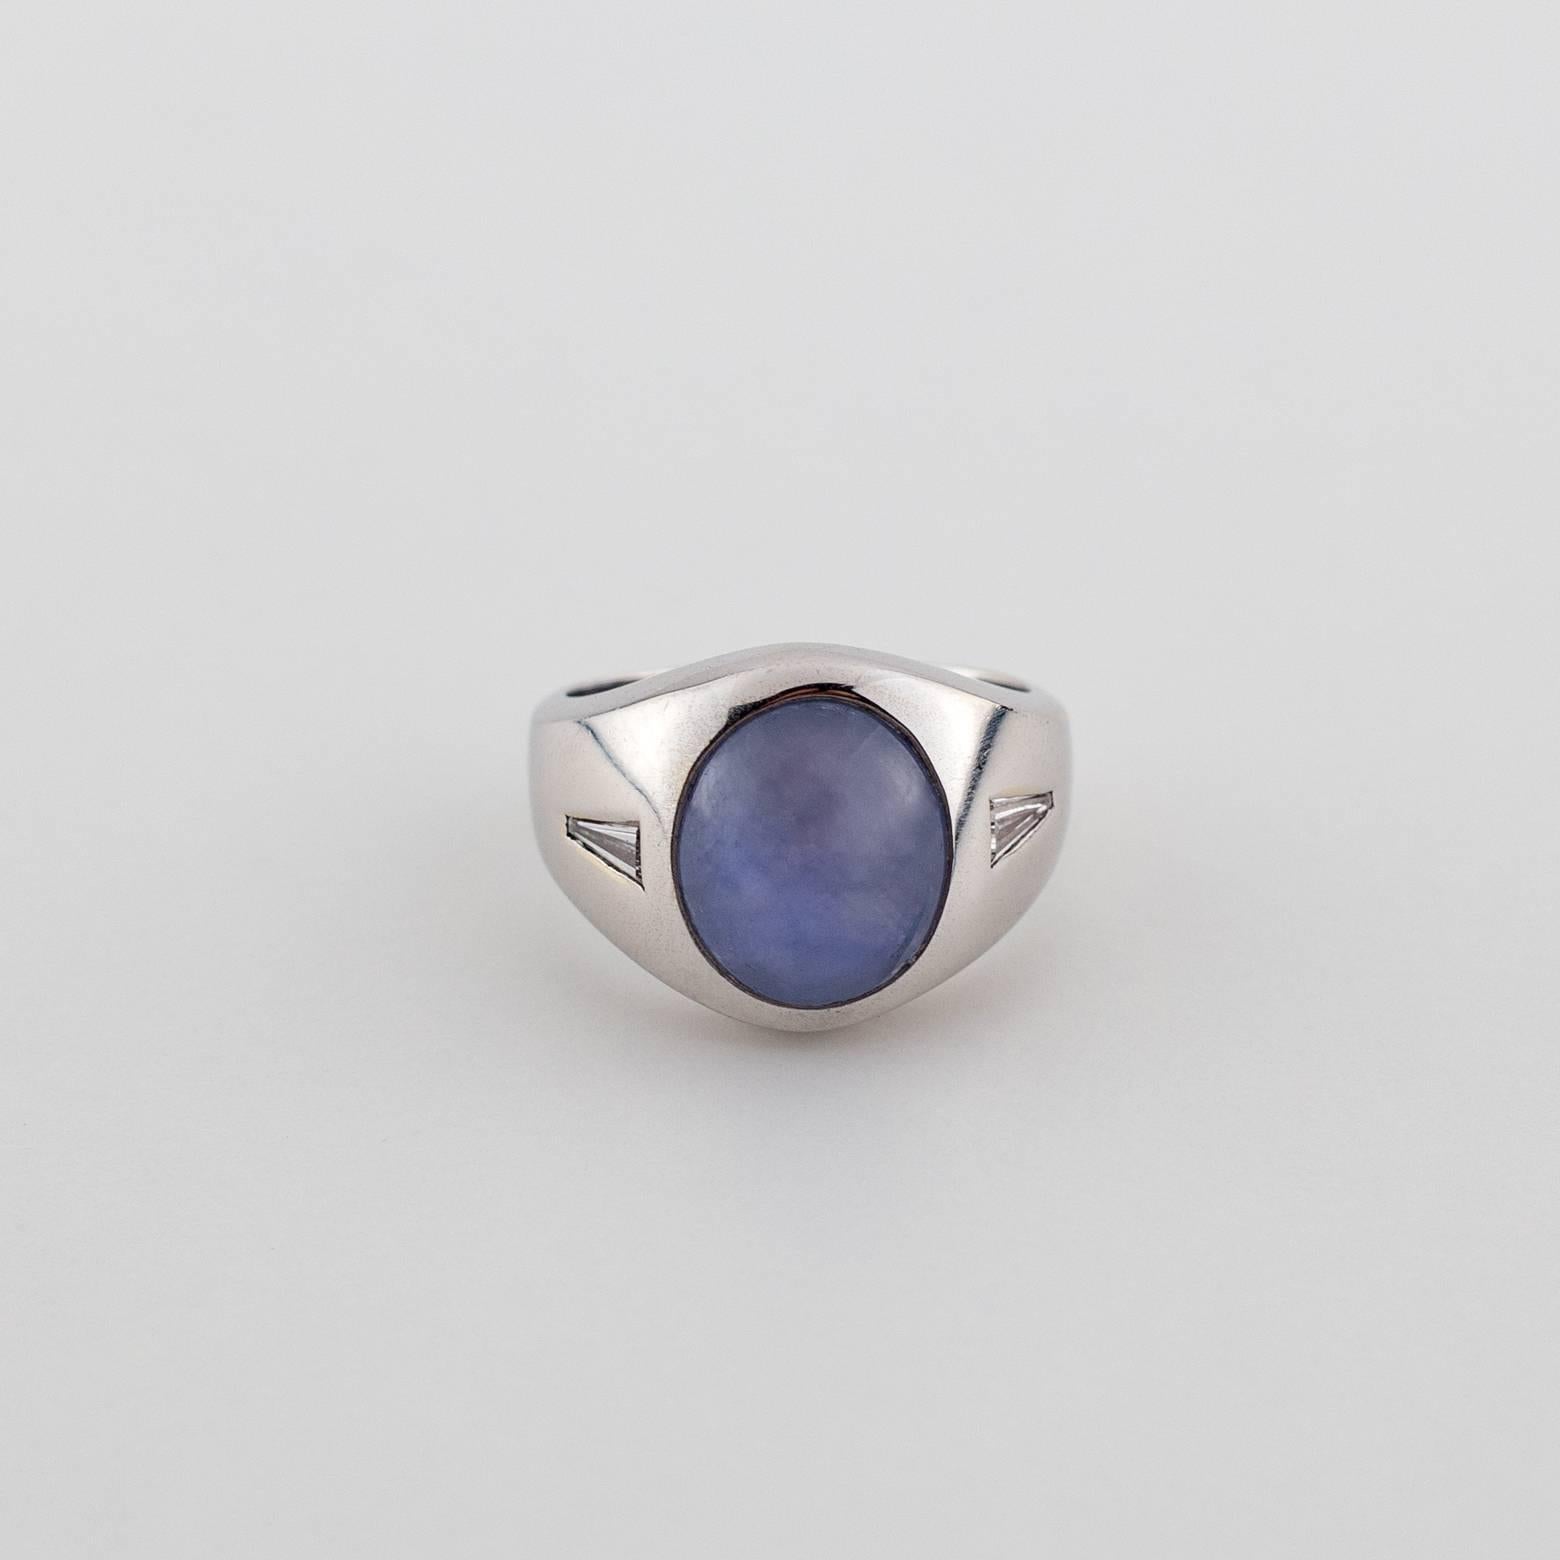 Bright and Shiny Star Sapphire aprox. 4.08 ct. Ring size 6.75. This truly is a STAR! The blue sapphire reflects light so bright and this ring has 2 diamonds on the side to accent it. Quite stunning!